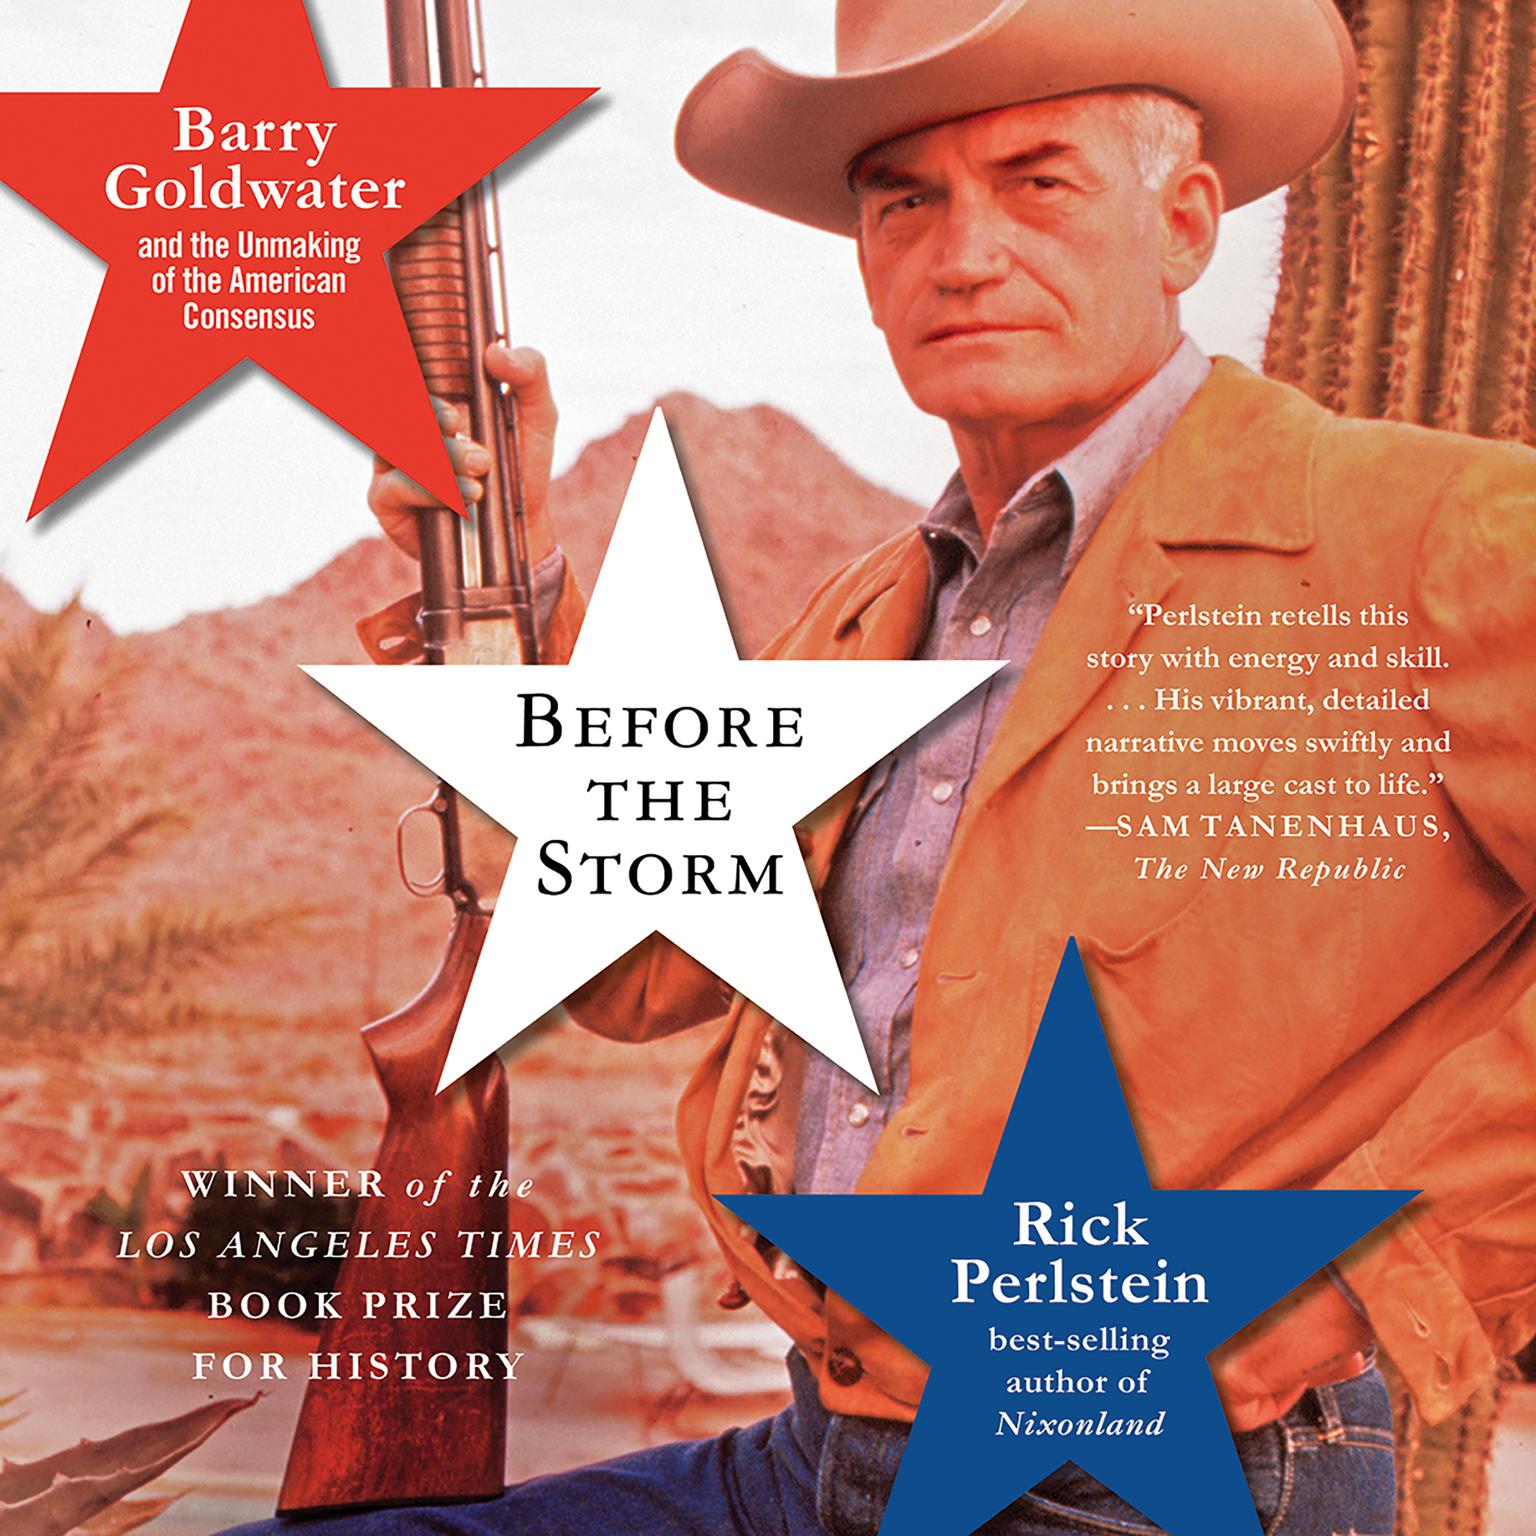 Before the Storm: Barry Goldwater and the Unmaking of the American Consensus Audiobook, by Rick Perlstein